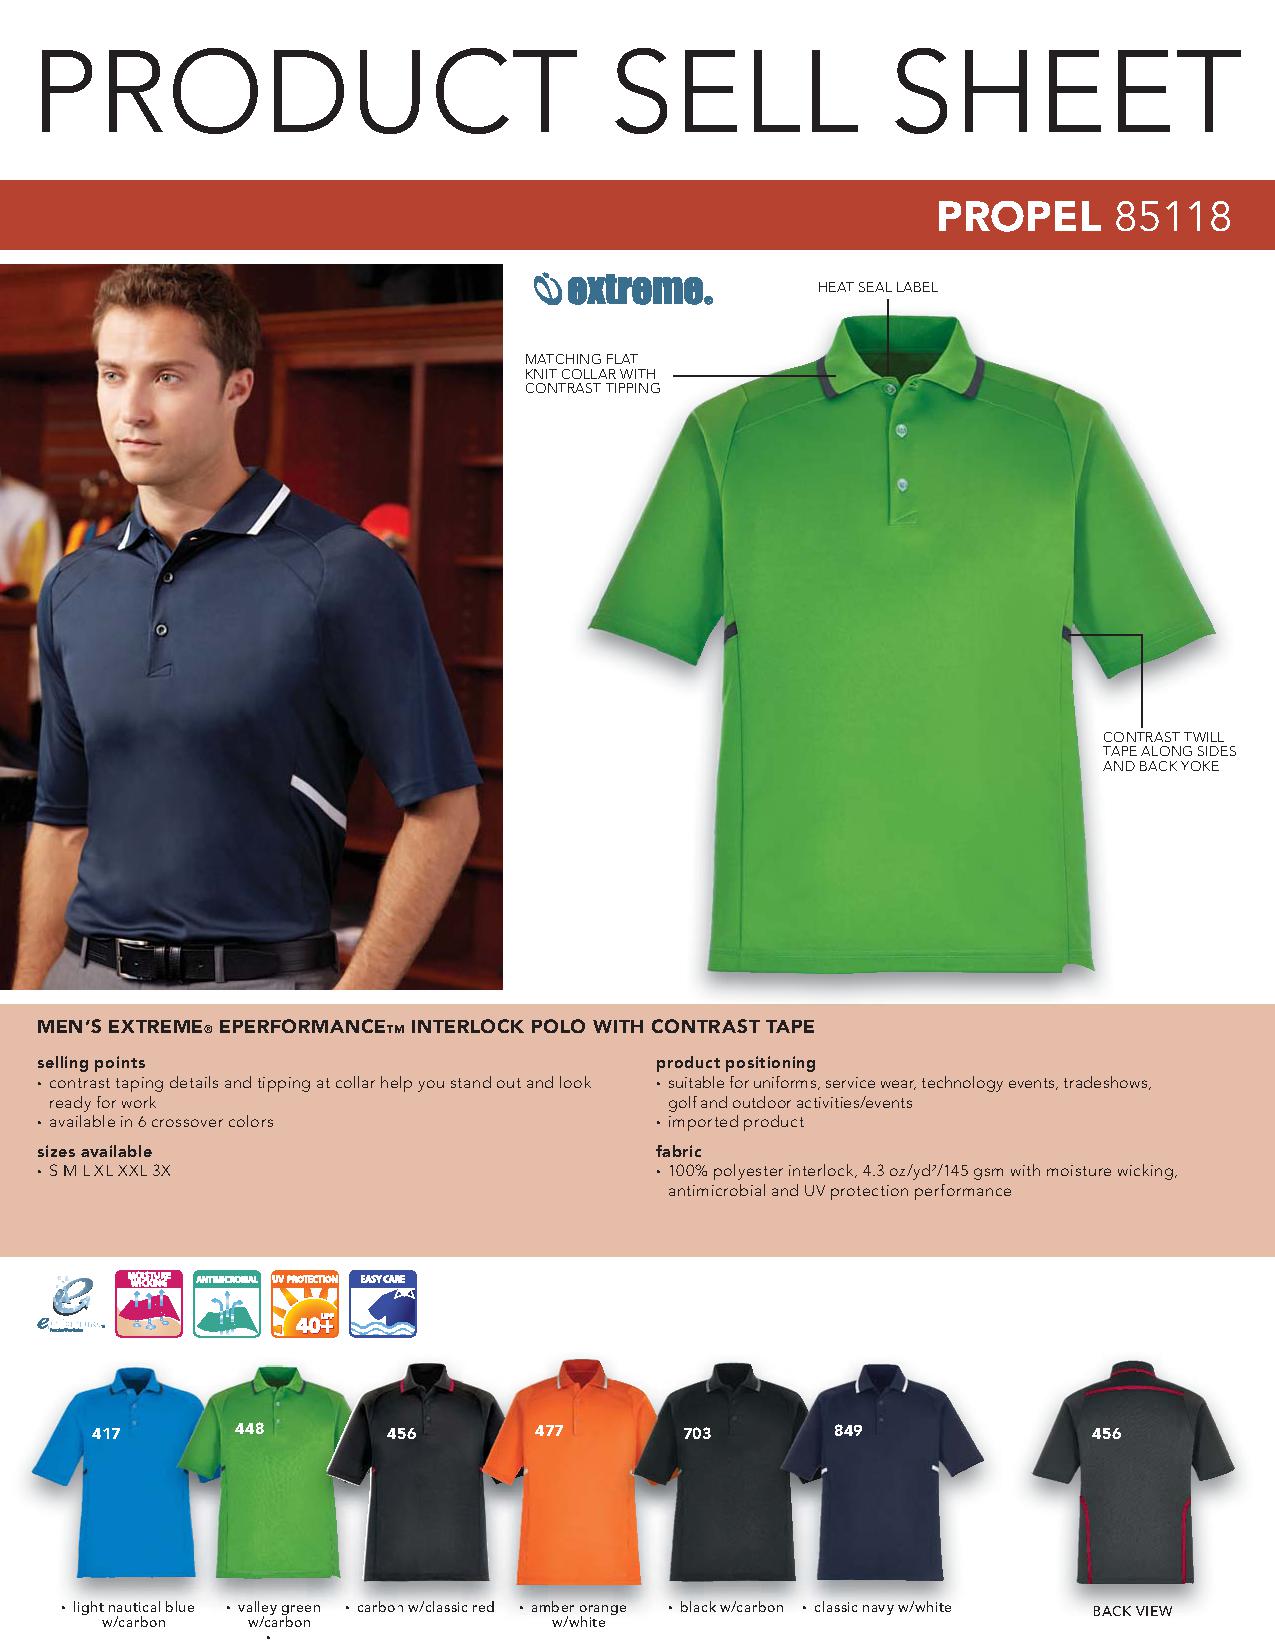 Ash City Eperformance 85118 - Propel Eperformance Interlock Polo With Contrast Tape